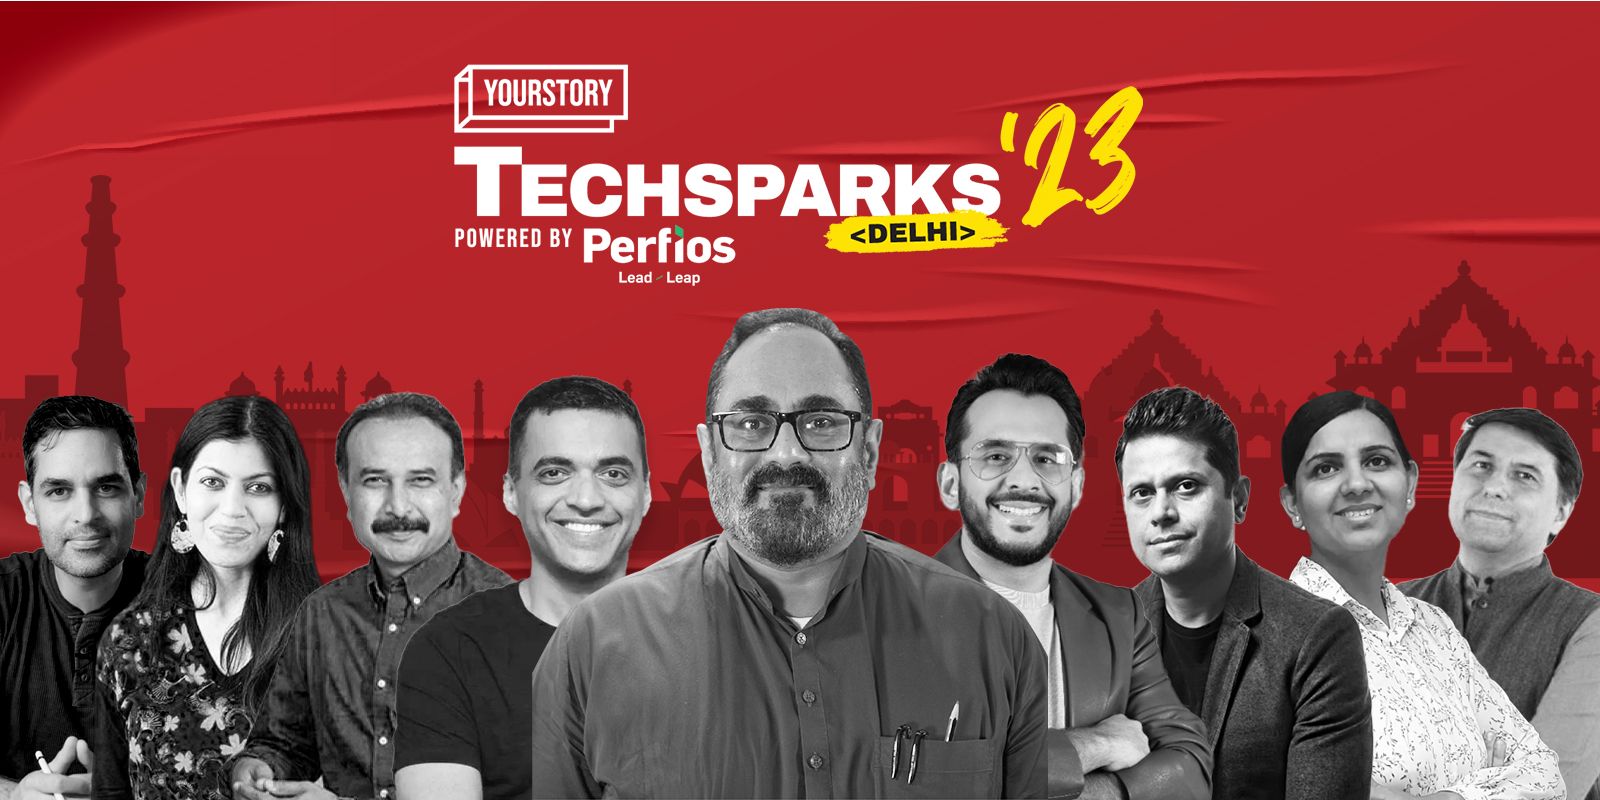 Here are some of India’s finest tech leaders you could meet at TechSparks Delhi